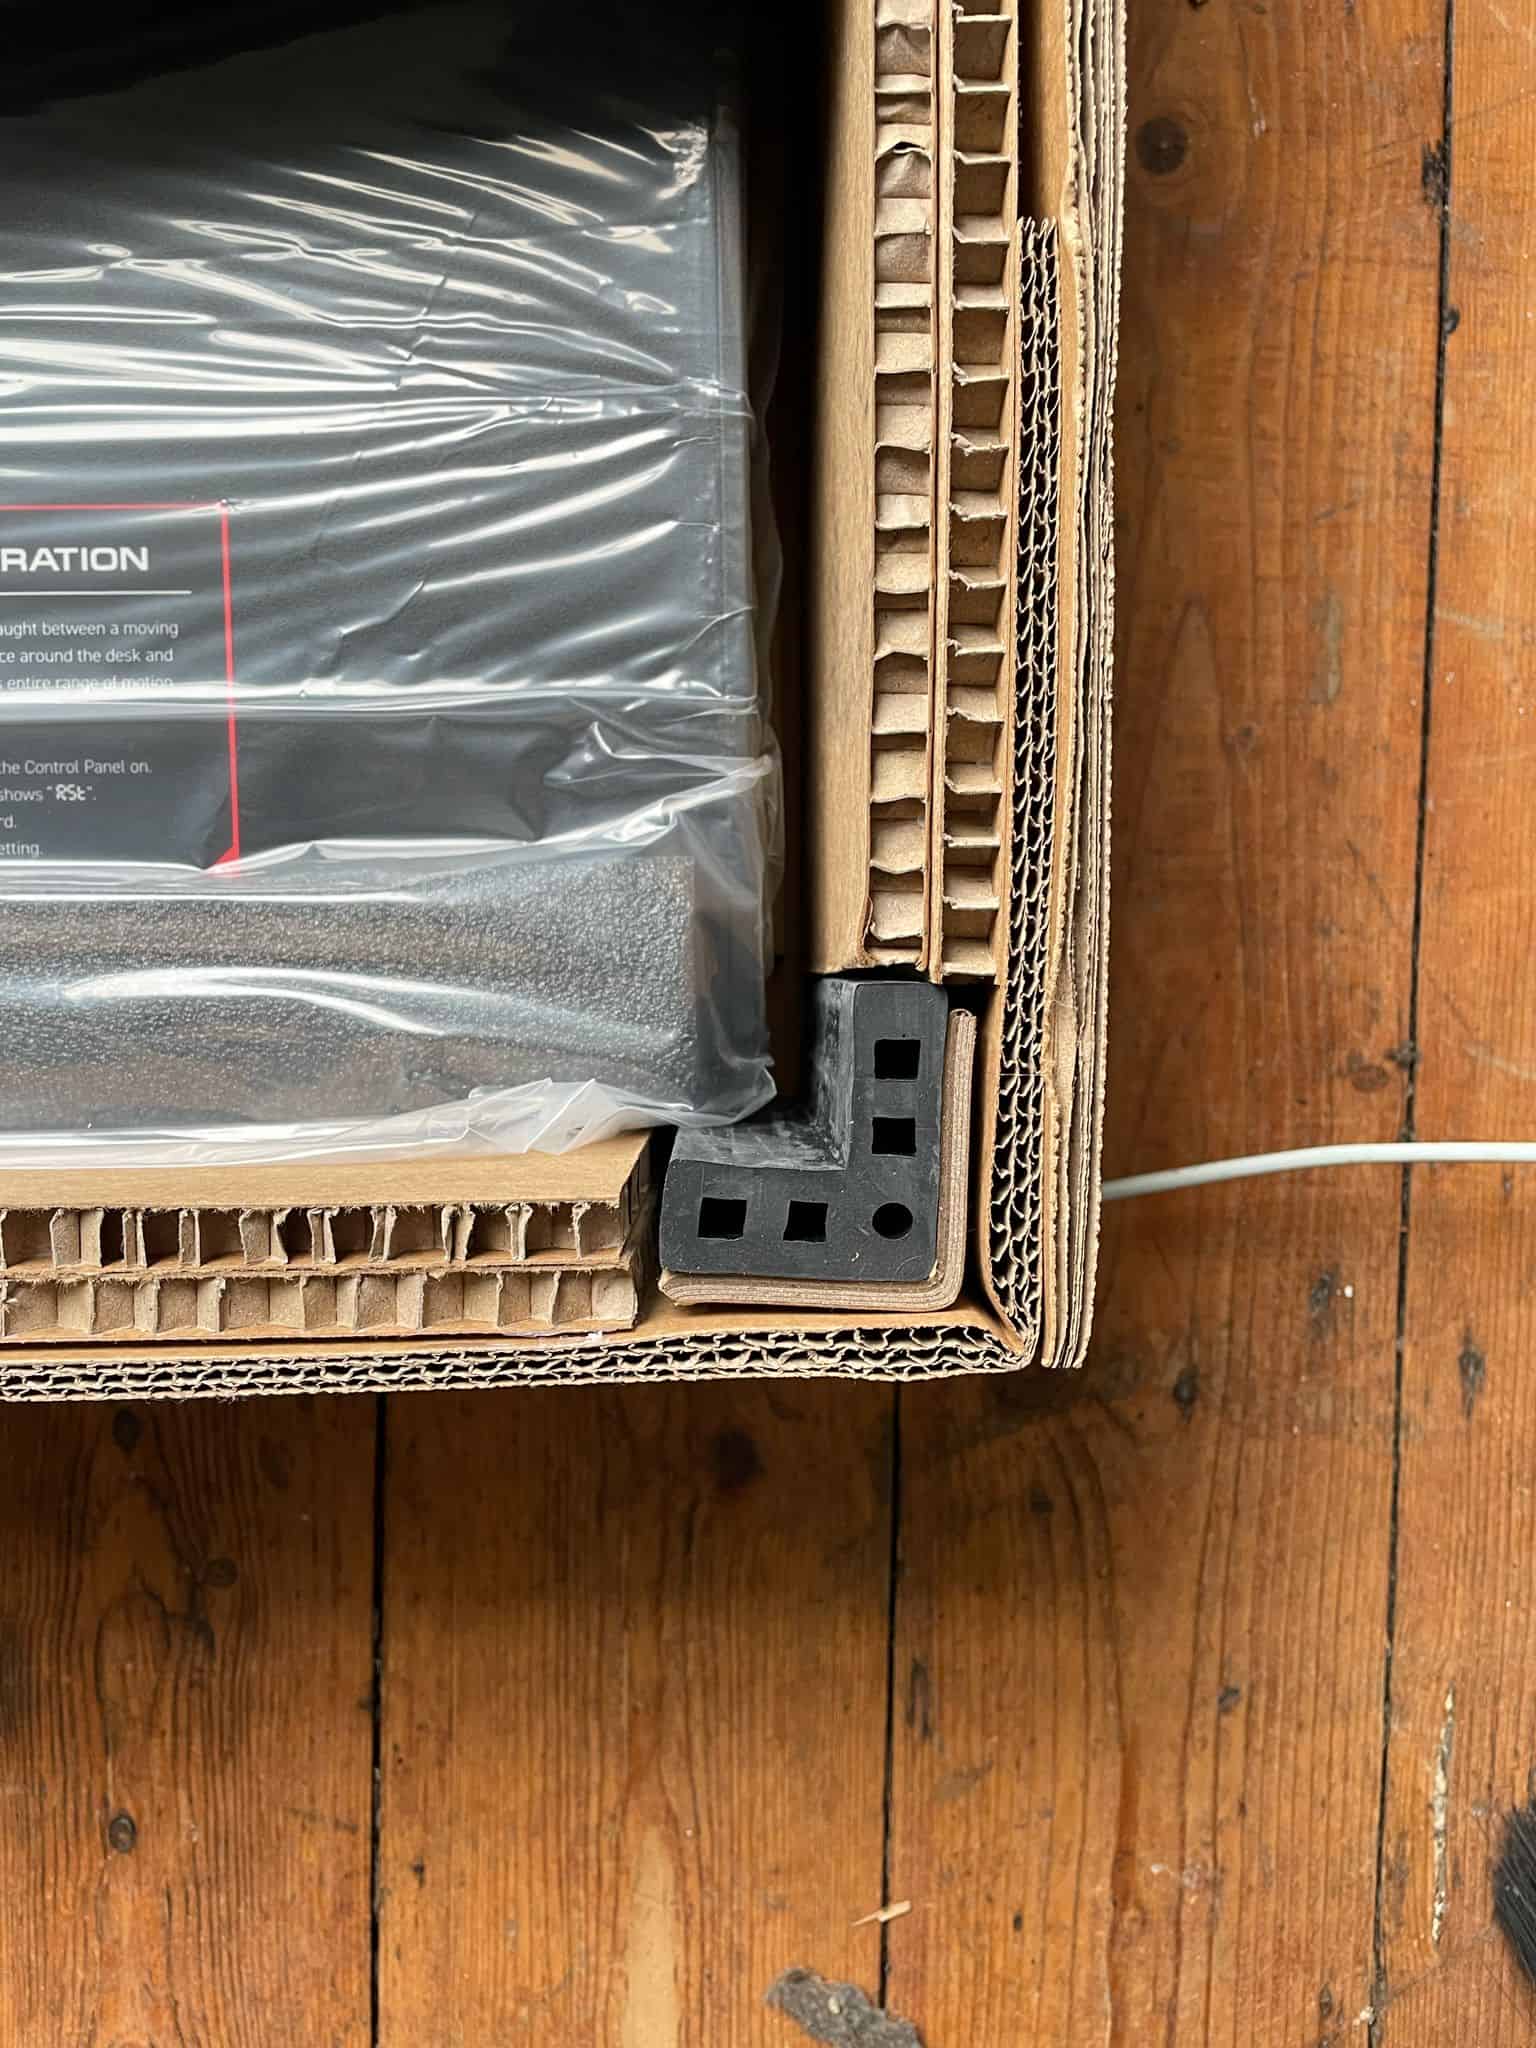 A laptop box placed on a wooden floor.